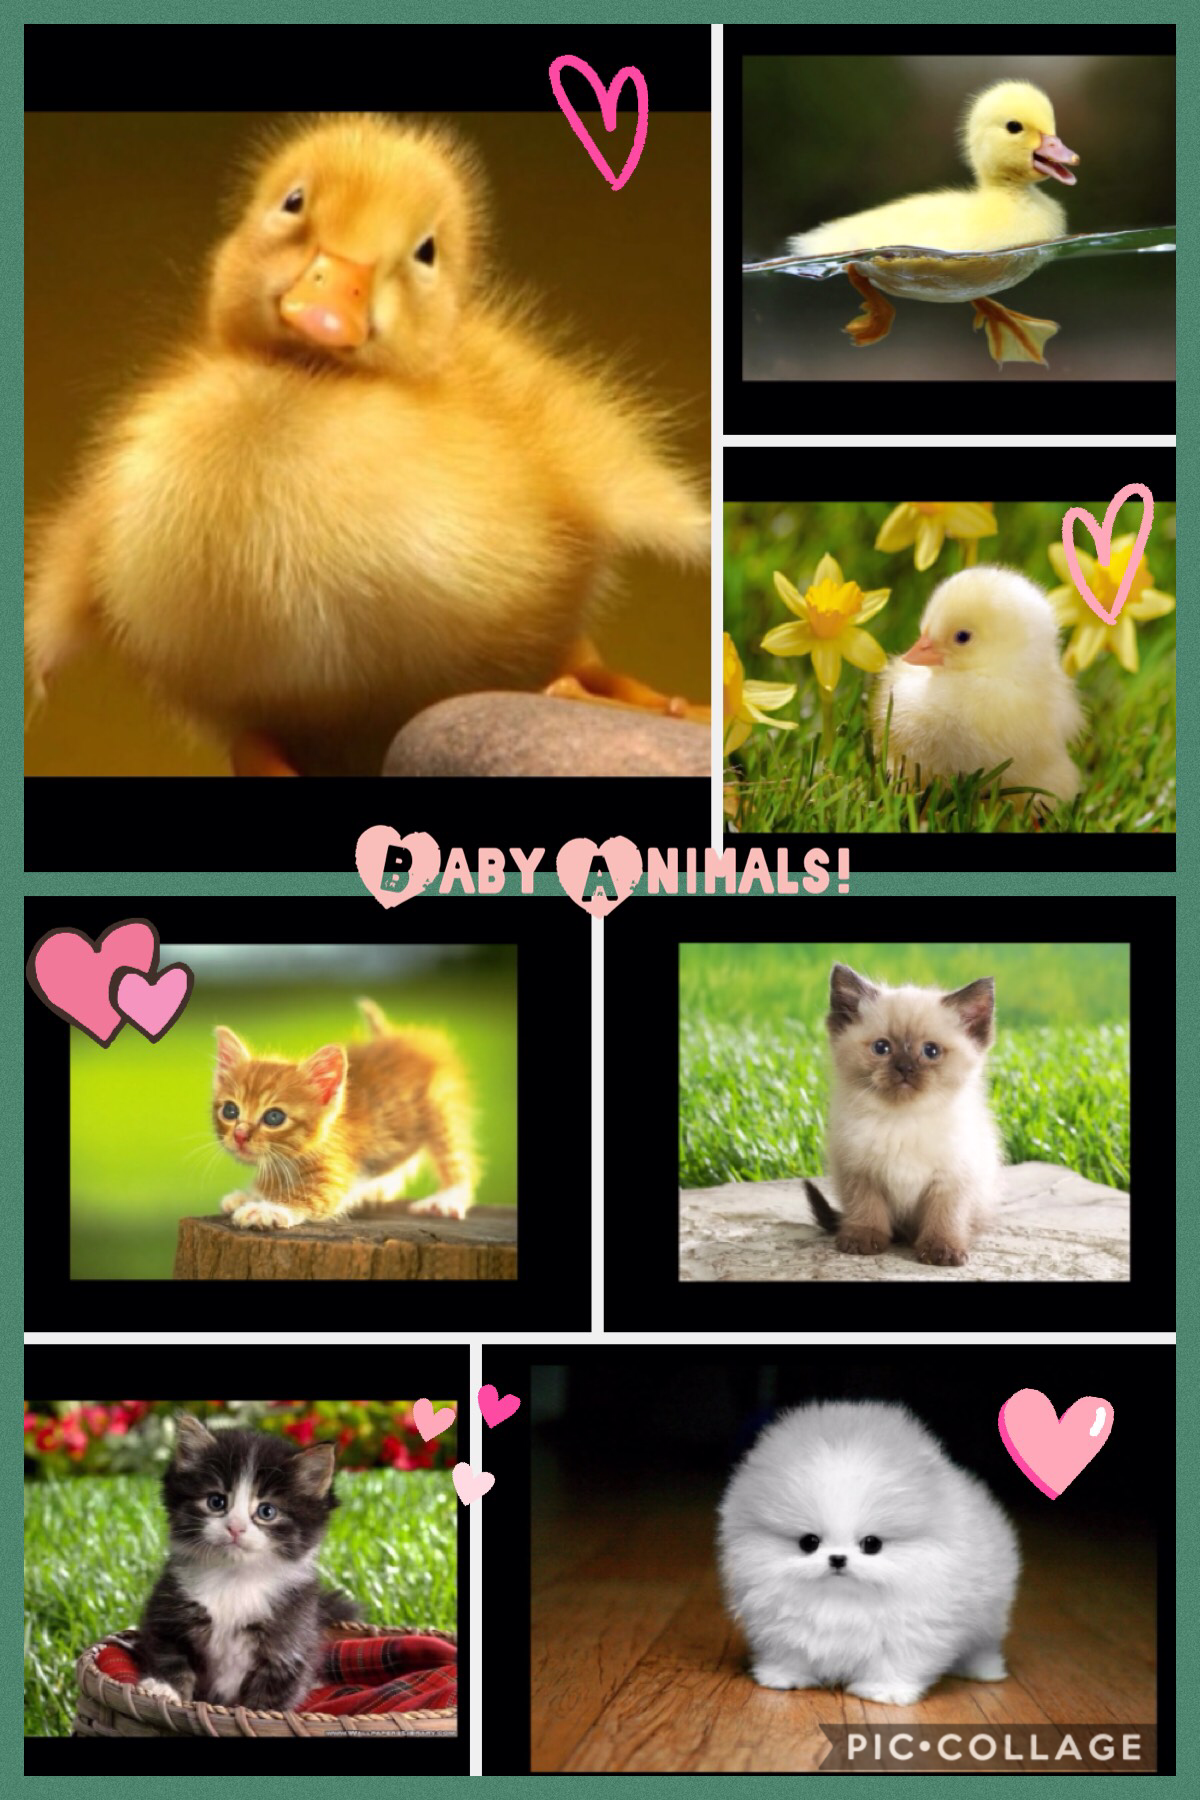 I totally love ducklings and kittens! There is a random puppy in there to for dog lovers!